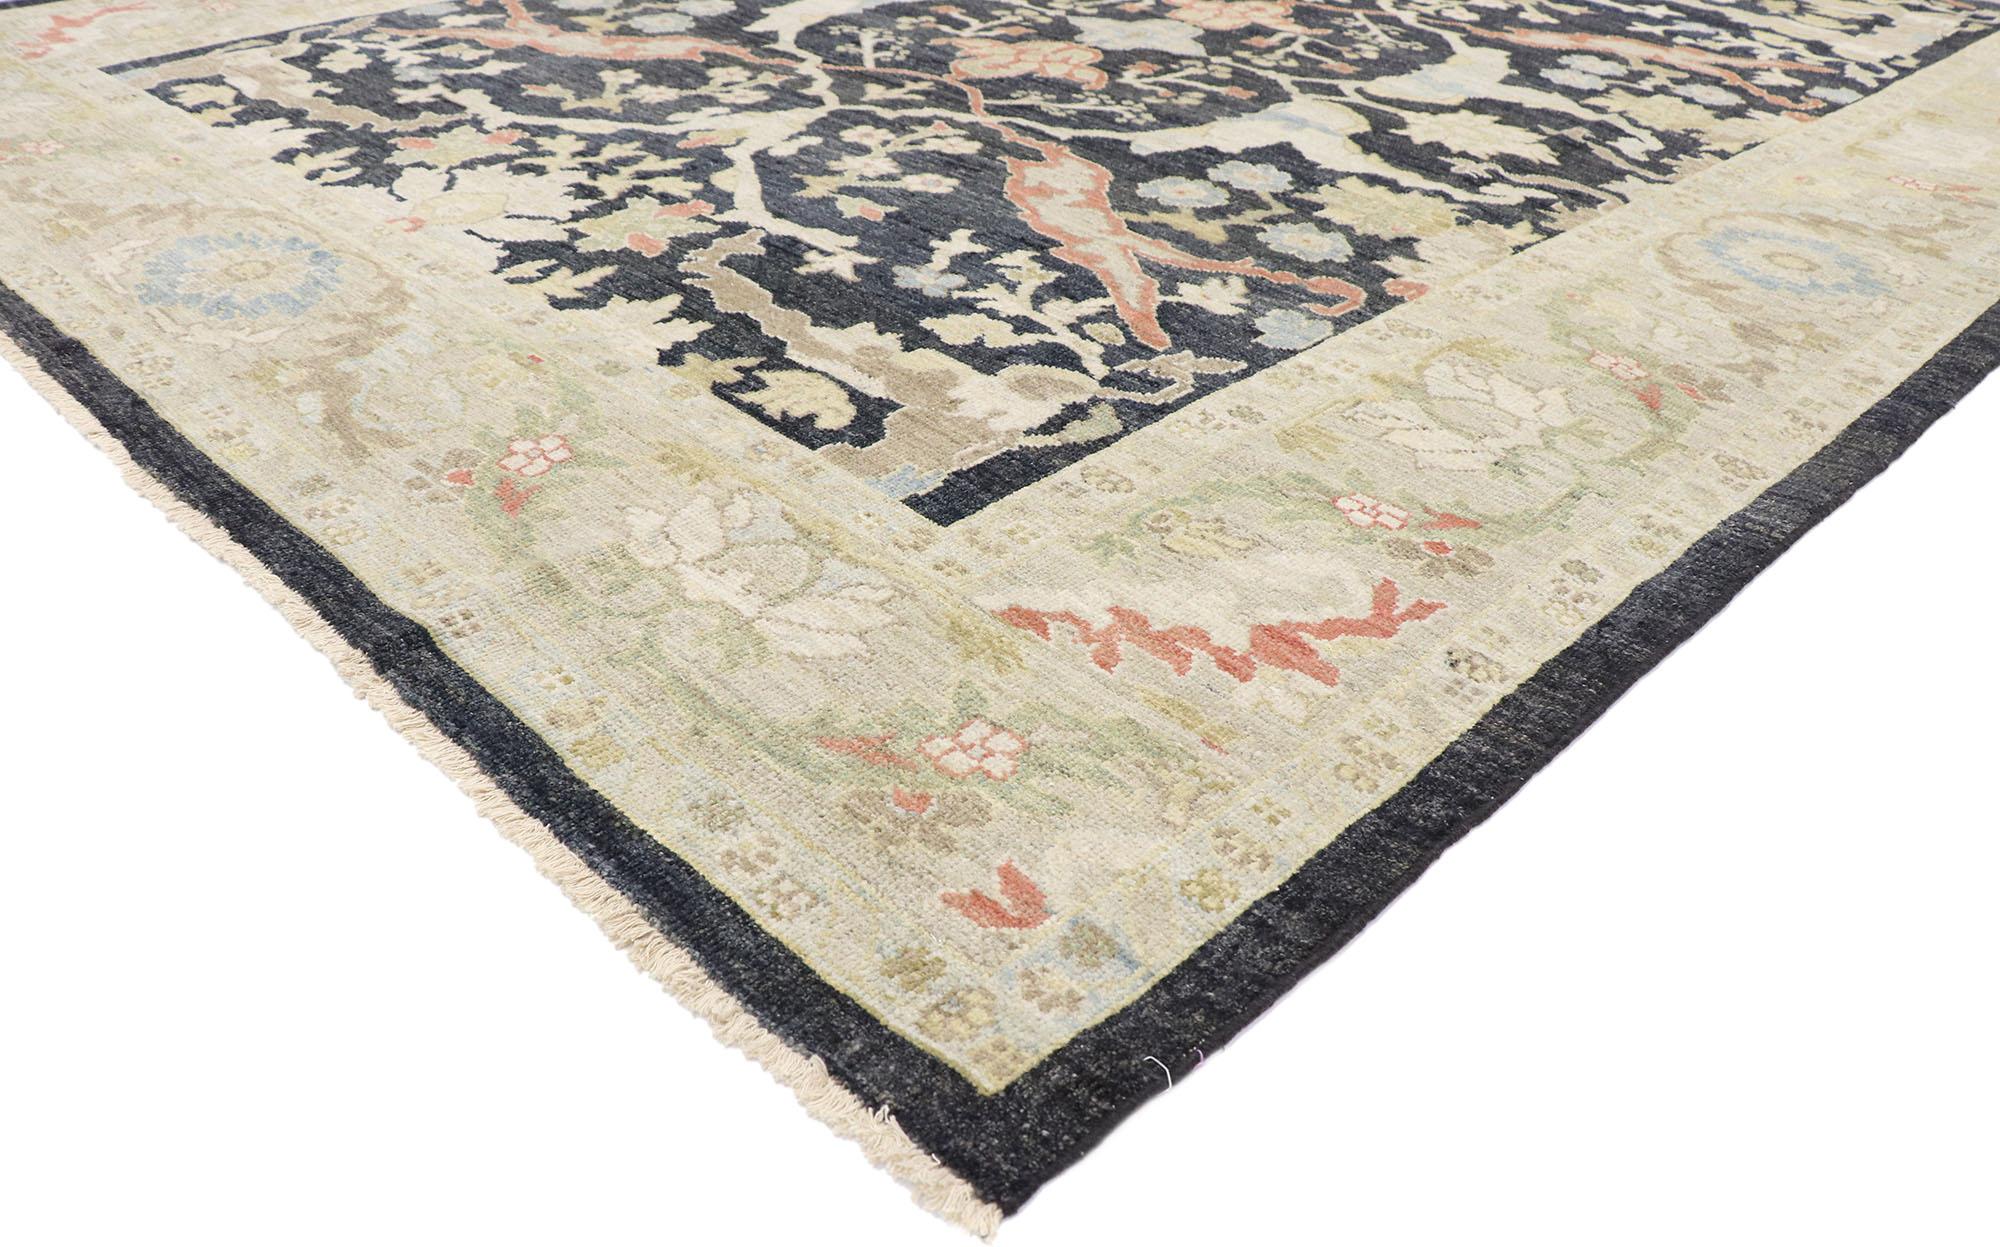 60884, New Contemporary Persian Sultanabad rug with Modern Parisian style. Blending elements from the modern world with a vibrant color palette, this hand knotted wool contemporary Parisian Sultanabad rug is poised to impress. It features an